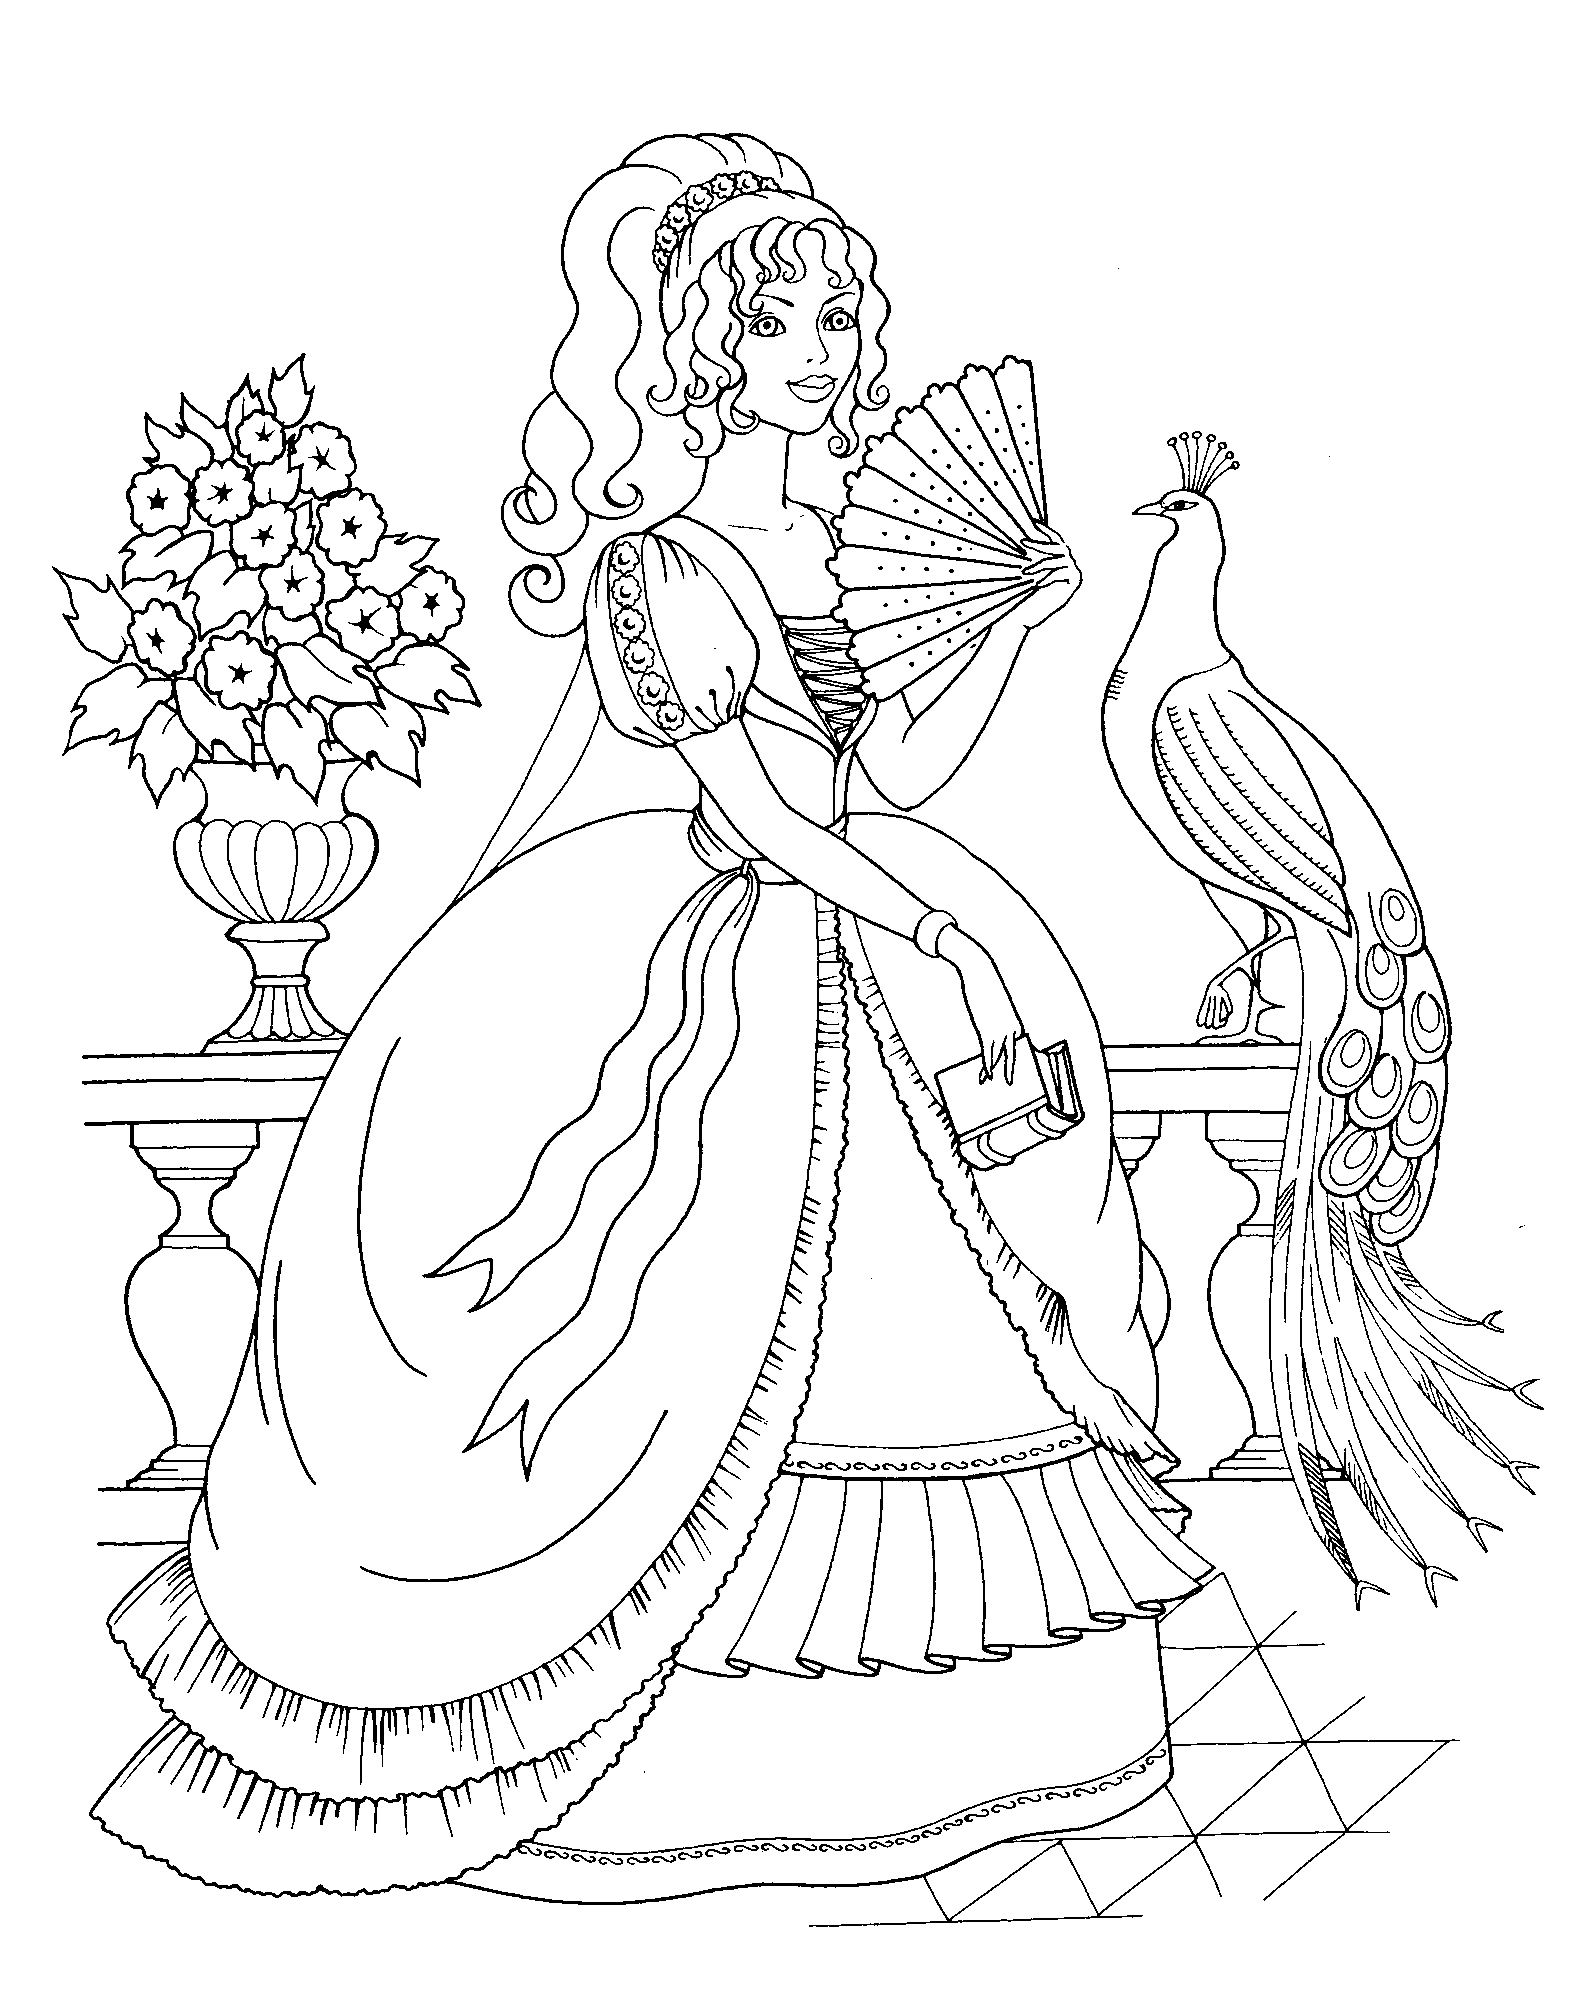 Barbie Marriage Coloring Pages - Coloring Pages For All Ages